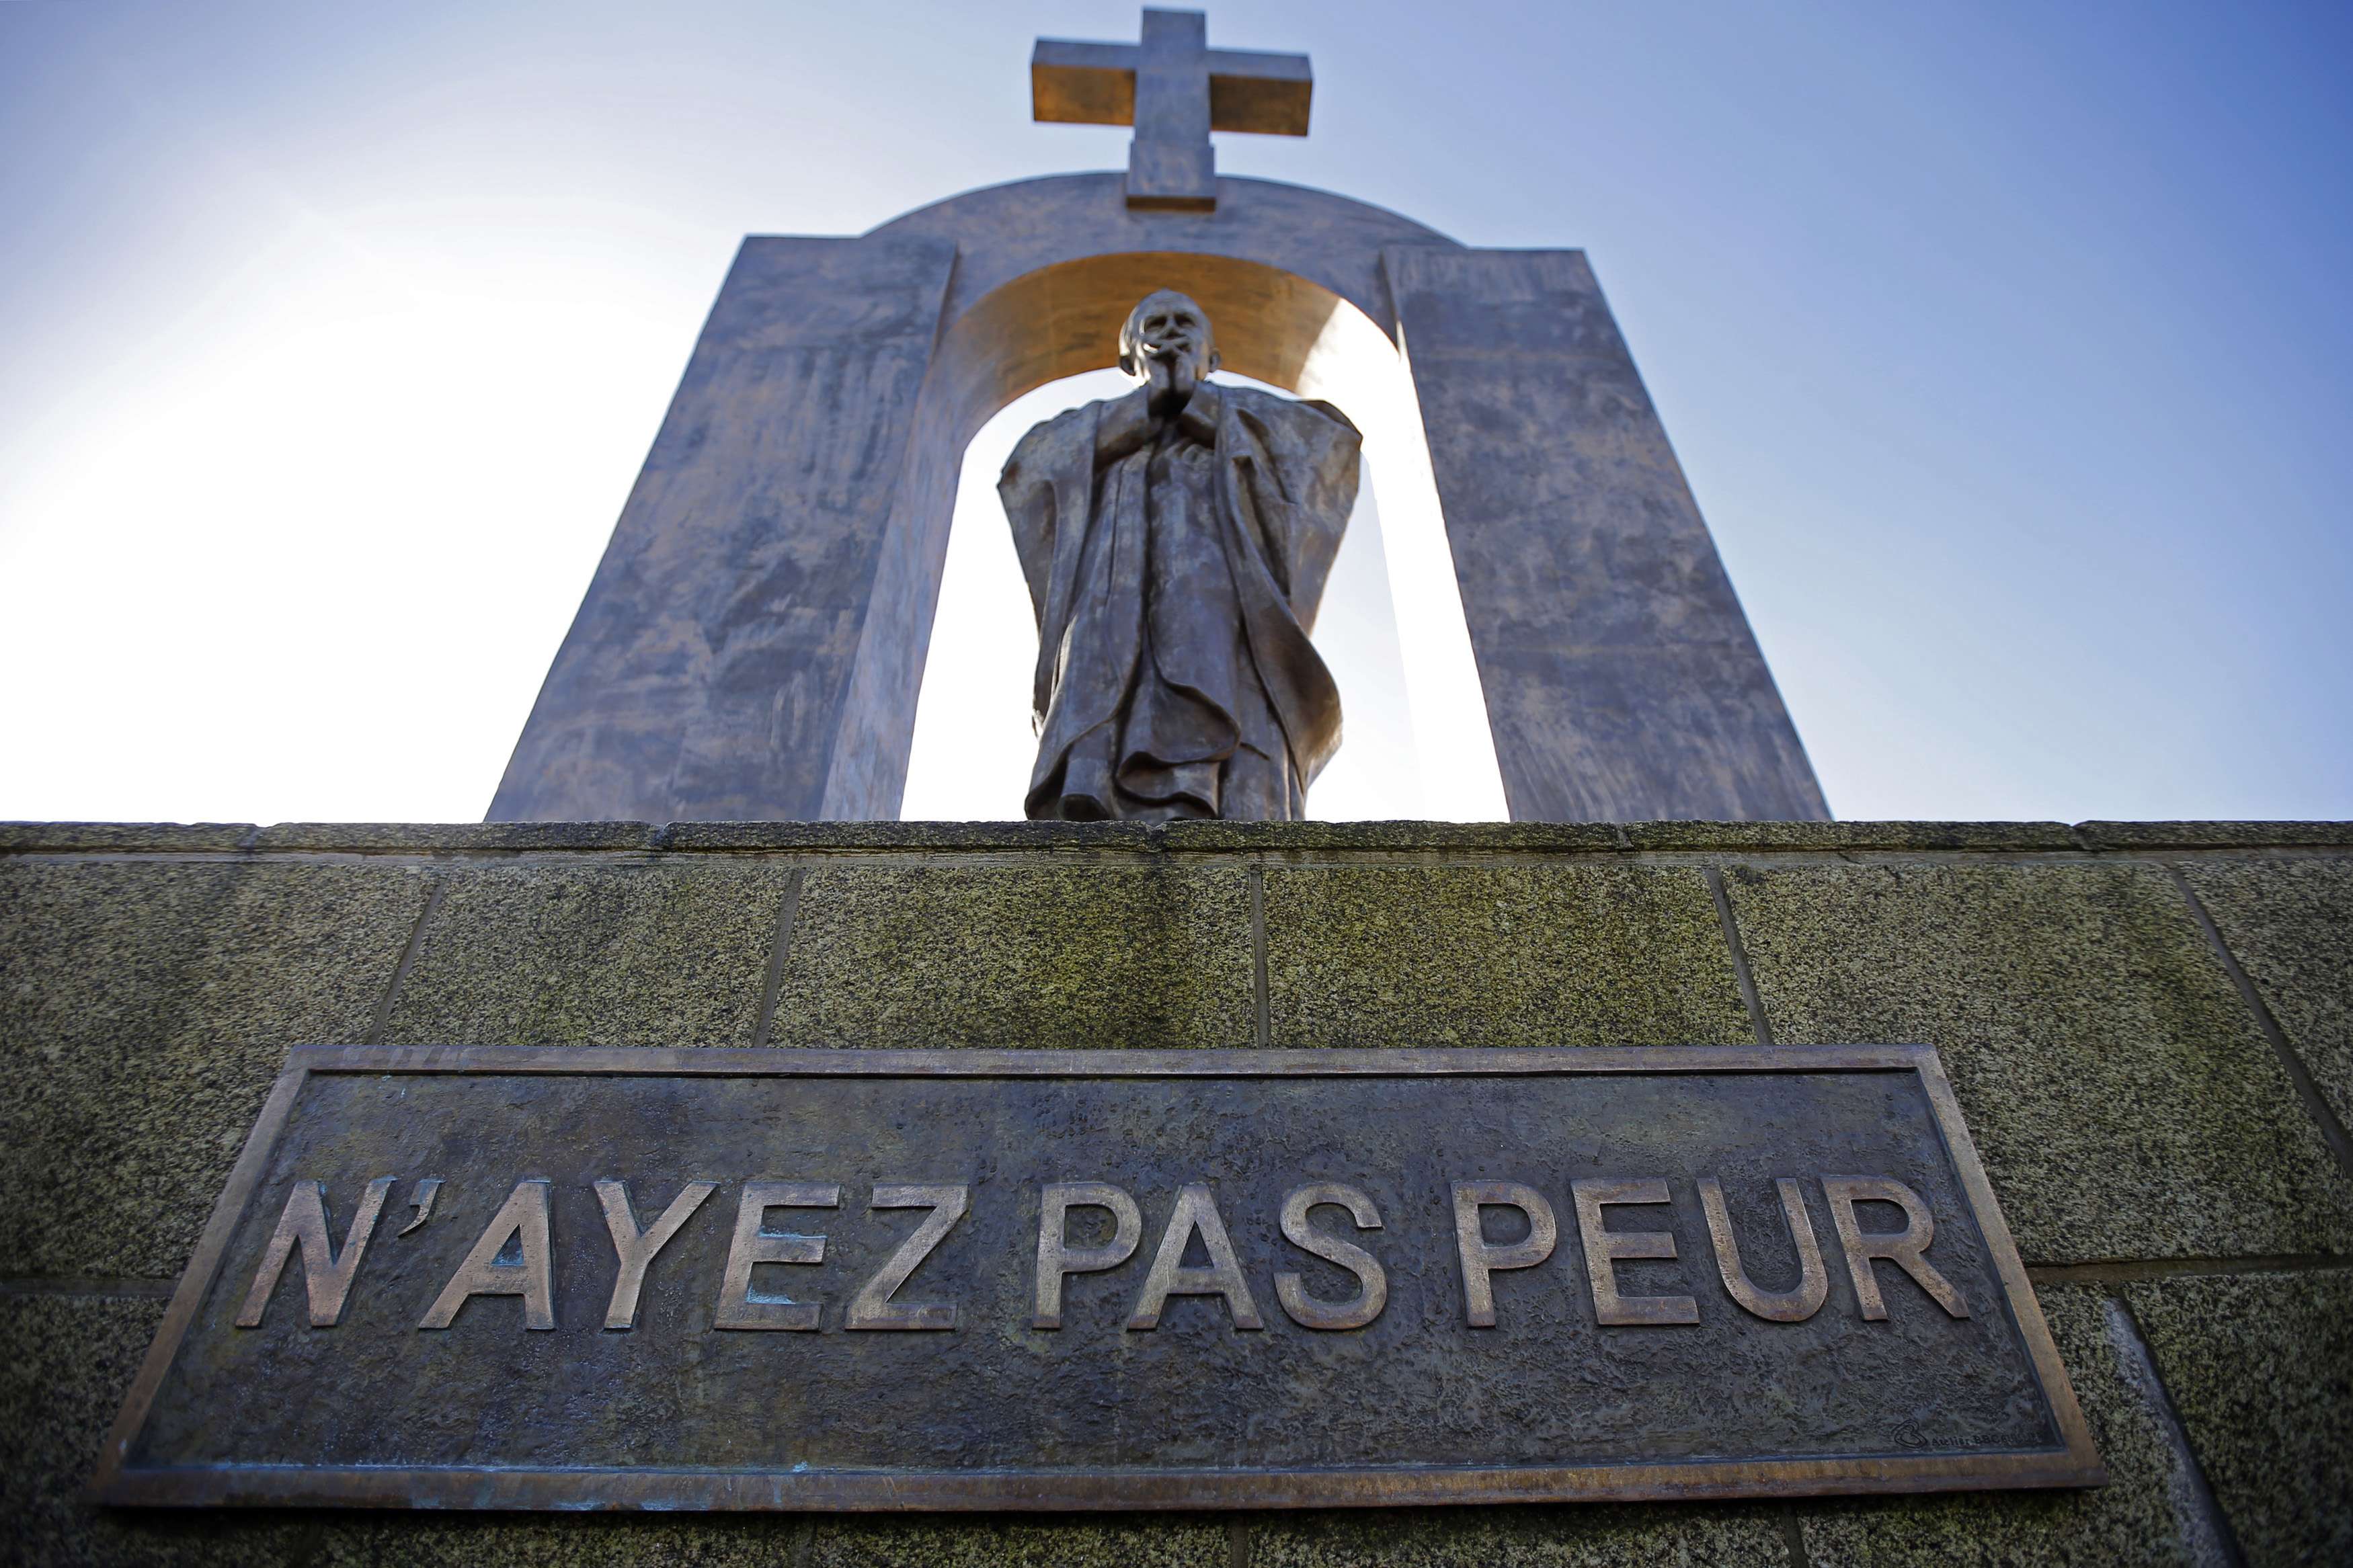 A statue of the late Pope John Paul II stands in Ploermel January 25, 2014. The sign reads: "Do not be afraid." Two giants of Roman Catholicism in the 20th century will become saints on April 27, 2014 at an unprecedented twin canonisation that has aroused both joy and controversy in the 1.2 billion-member Church. Pope John XXIII, who reigned from 1958 to 1963 and called the modernising Second Vatican Council, and Pope John Paul II, who reigned for nearly 27 years before his death in 2005 and whose trips around the world made him the most visible pope in history, will be declared saints by Pope Francis. Picture taken January 25, 2014. REUTERS/Stephane Mahe (FRANCE - Tags: RELIGION SOCIETY) ATTENTION EDITORS: PICTURE 17 OF 17 FOR PACKAGE 'POPE JOHN PAUL II - SOON TO BE SAINT'  TO FIND ALL IMAGES SEARCH 'POPE JOHN PAUL CANONISATION'